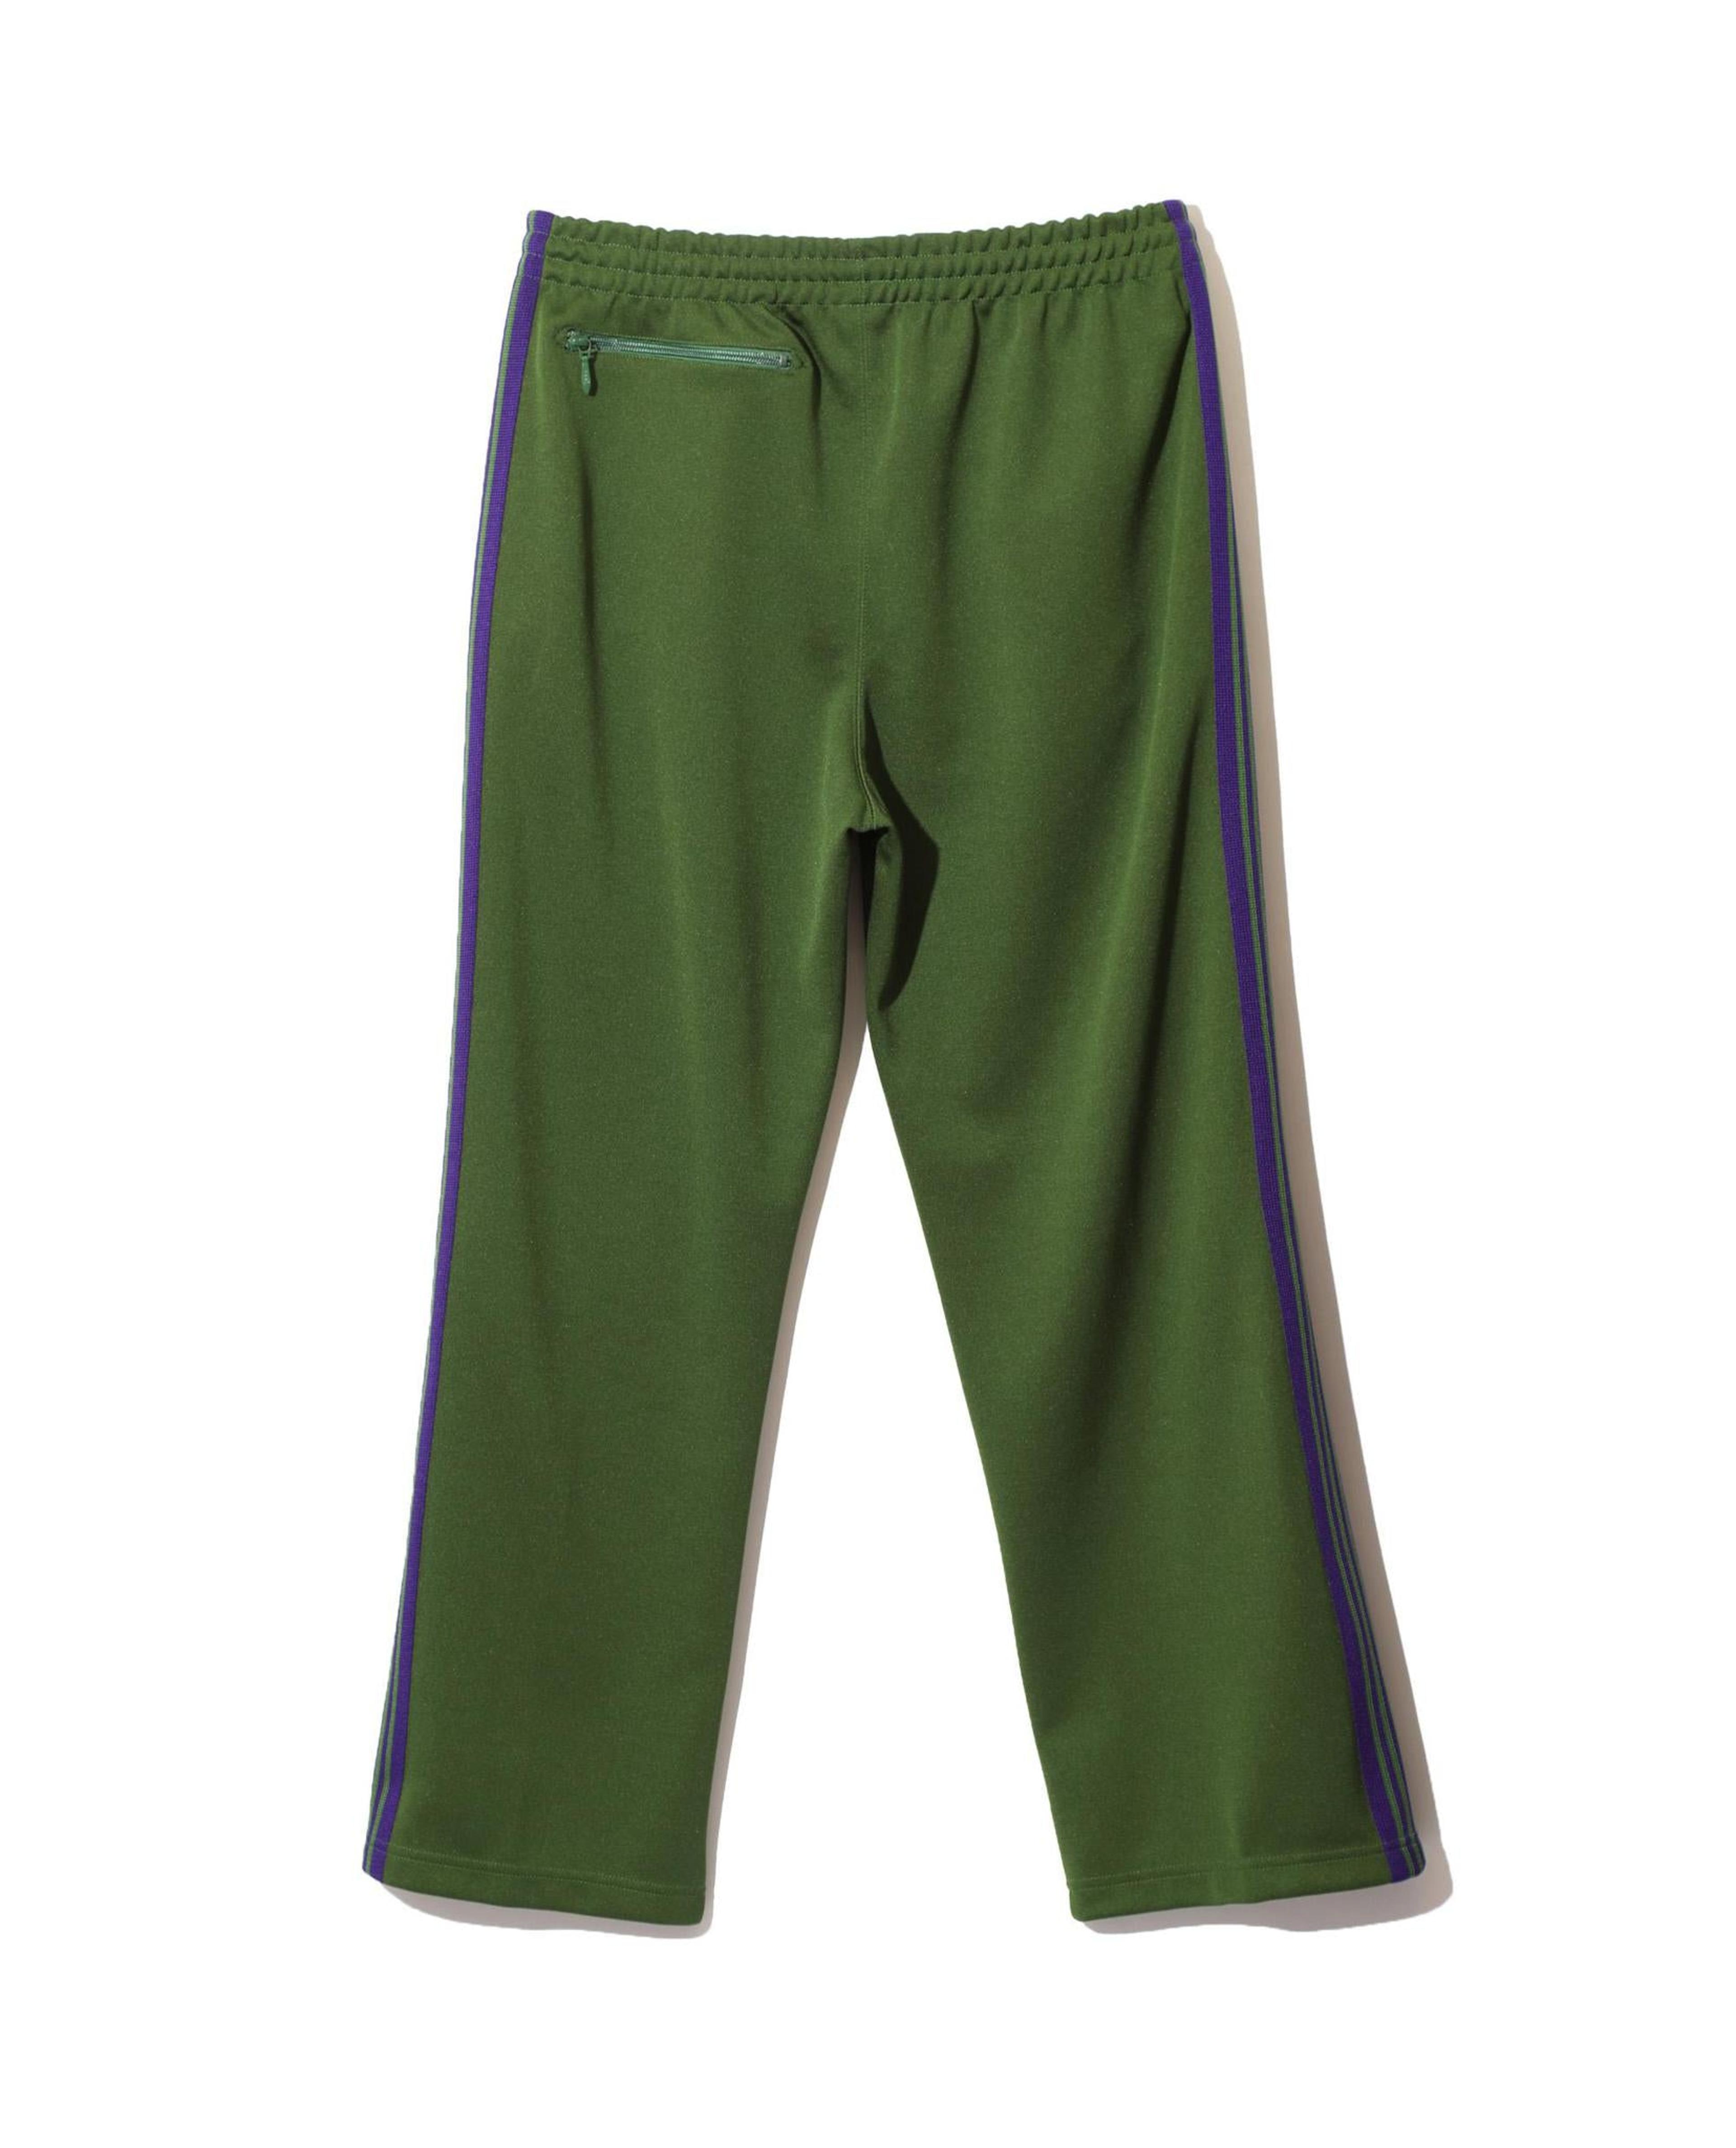 Alternate View 1 of Needles Track Pant - Poly Smooth